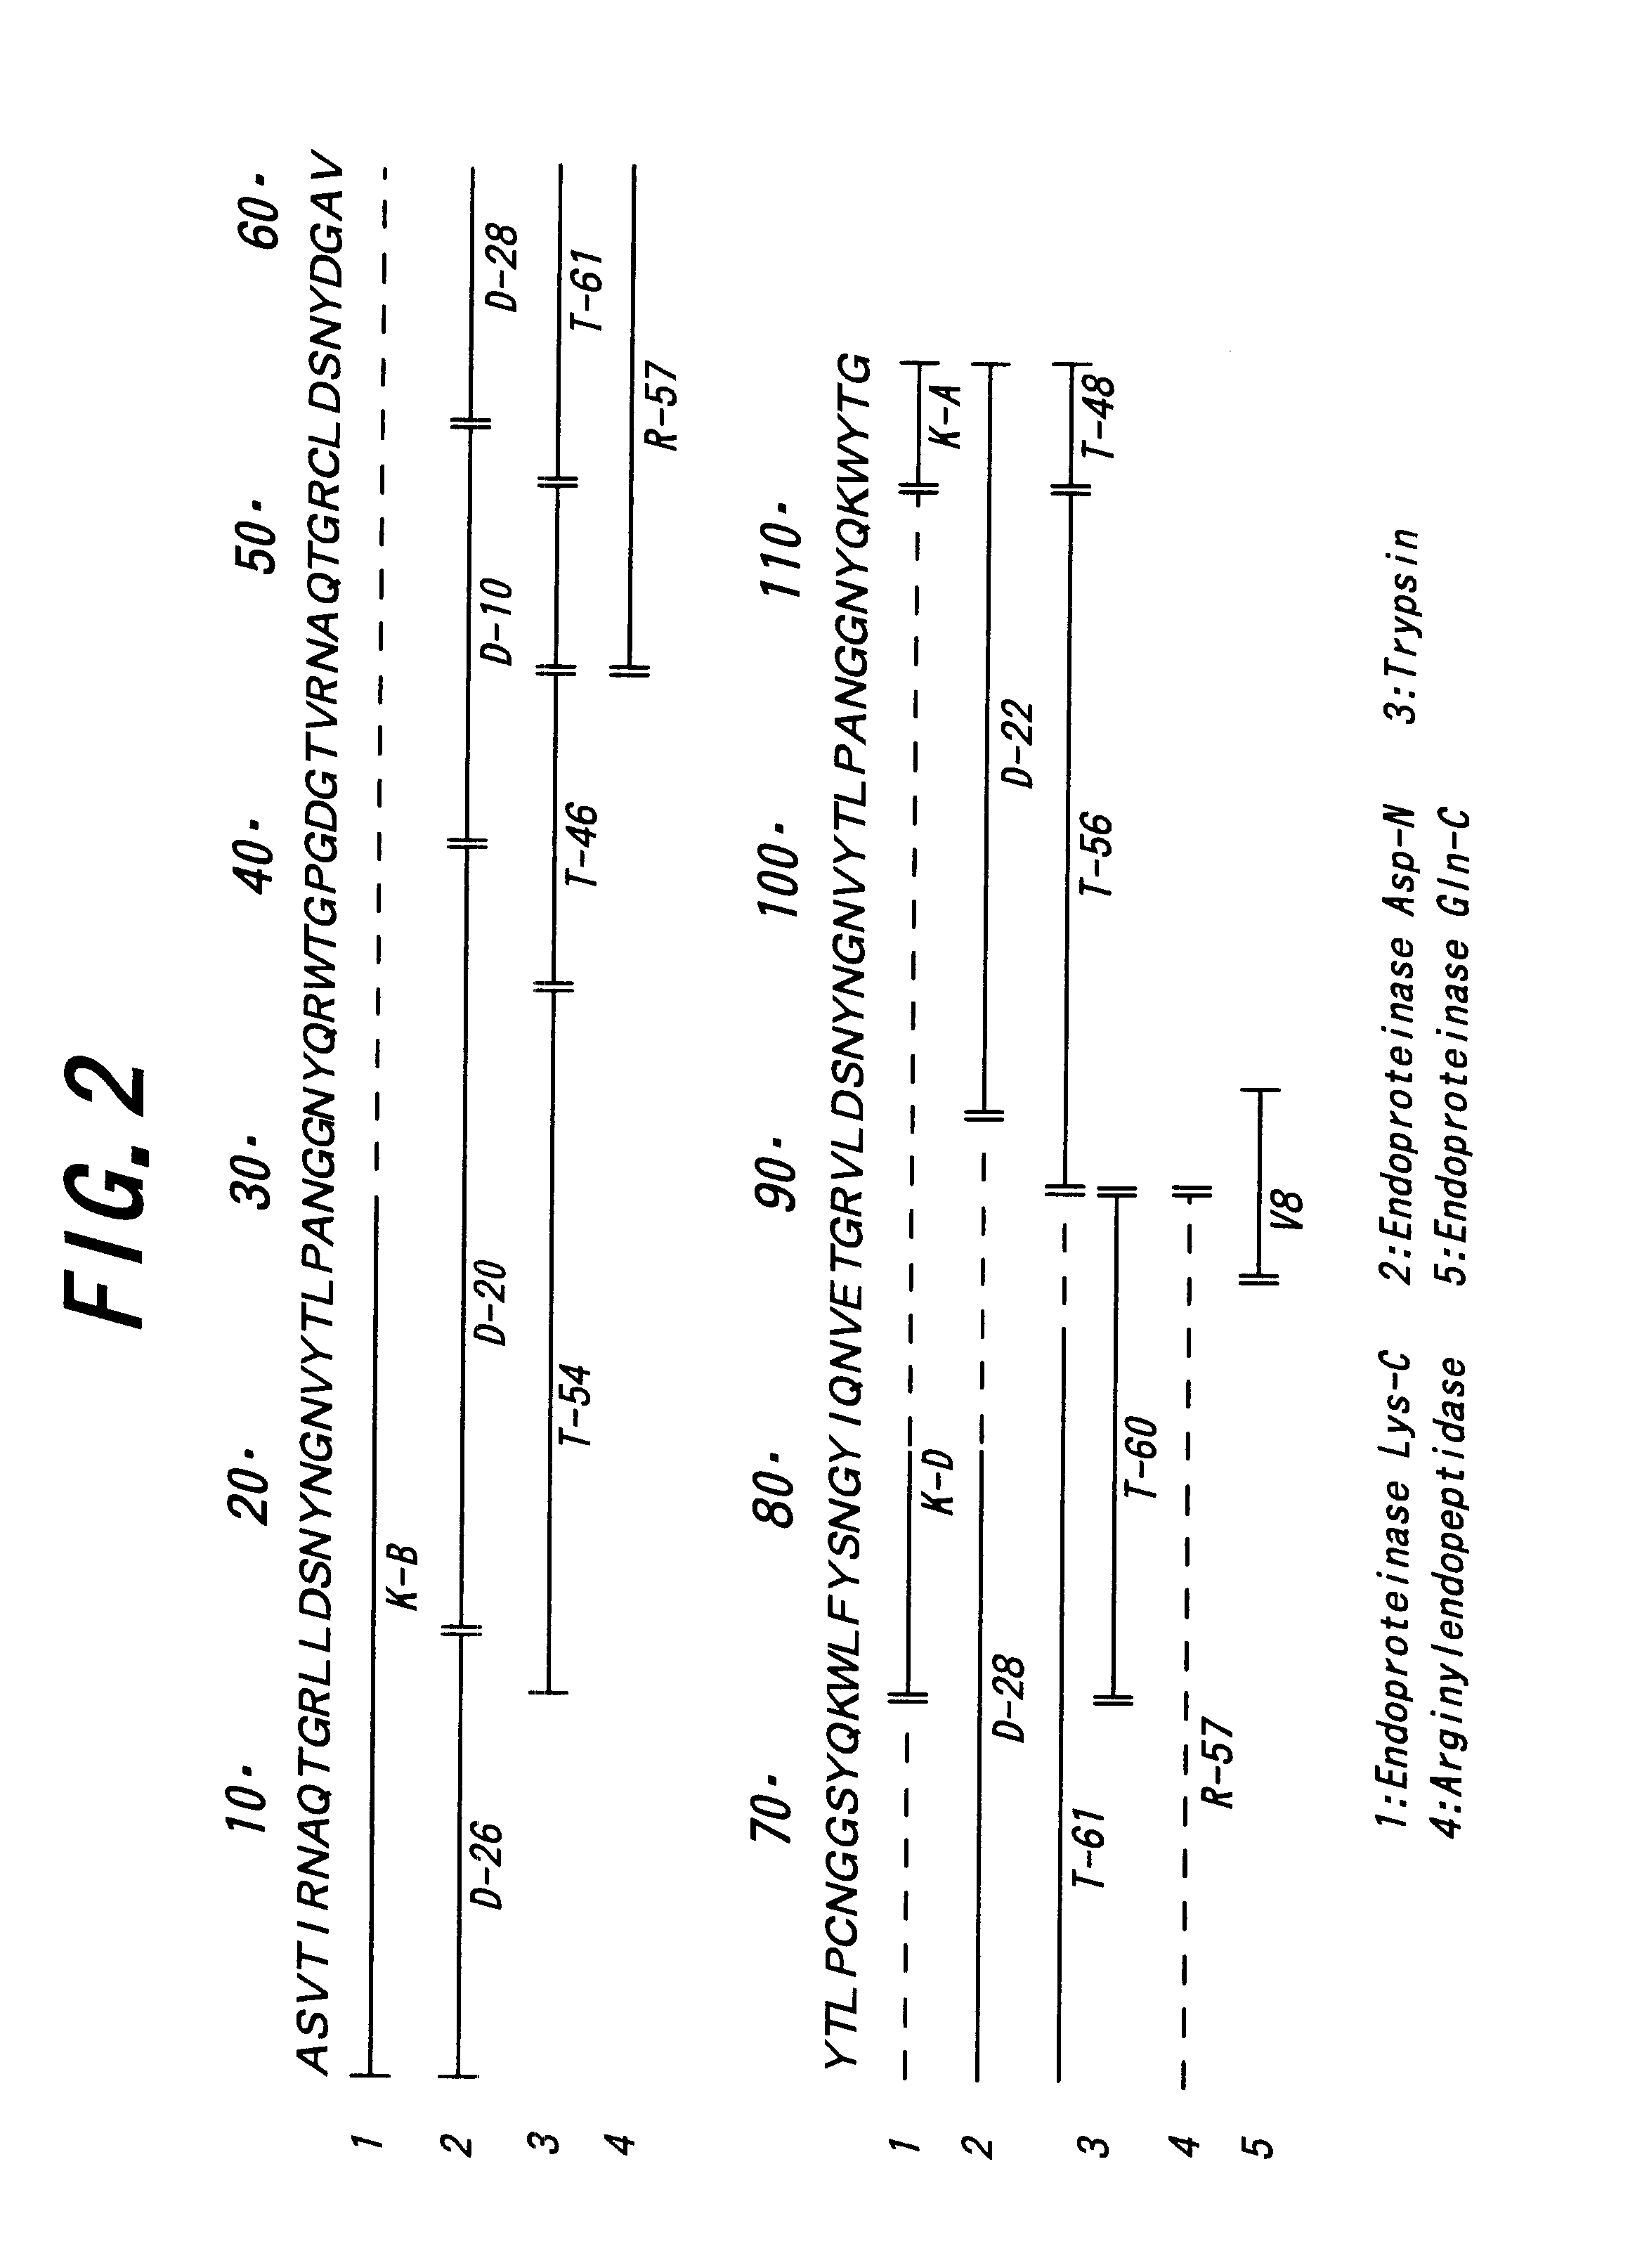 Polypeptide having human HIV inhibitory activity, a gene encoding the polypeptide, a method to produce the polypeptide